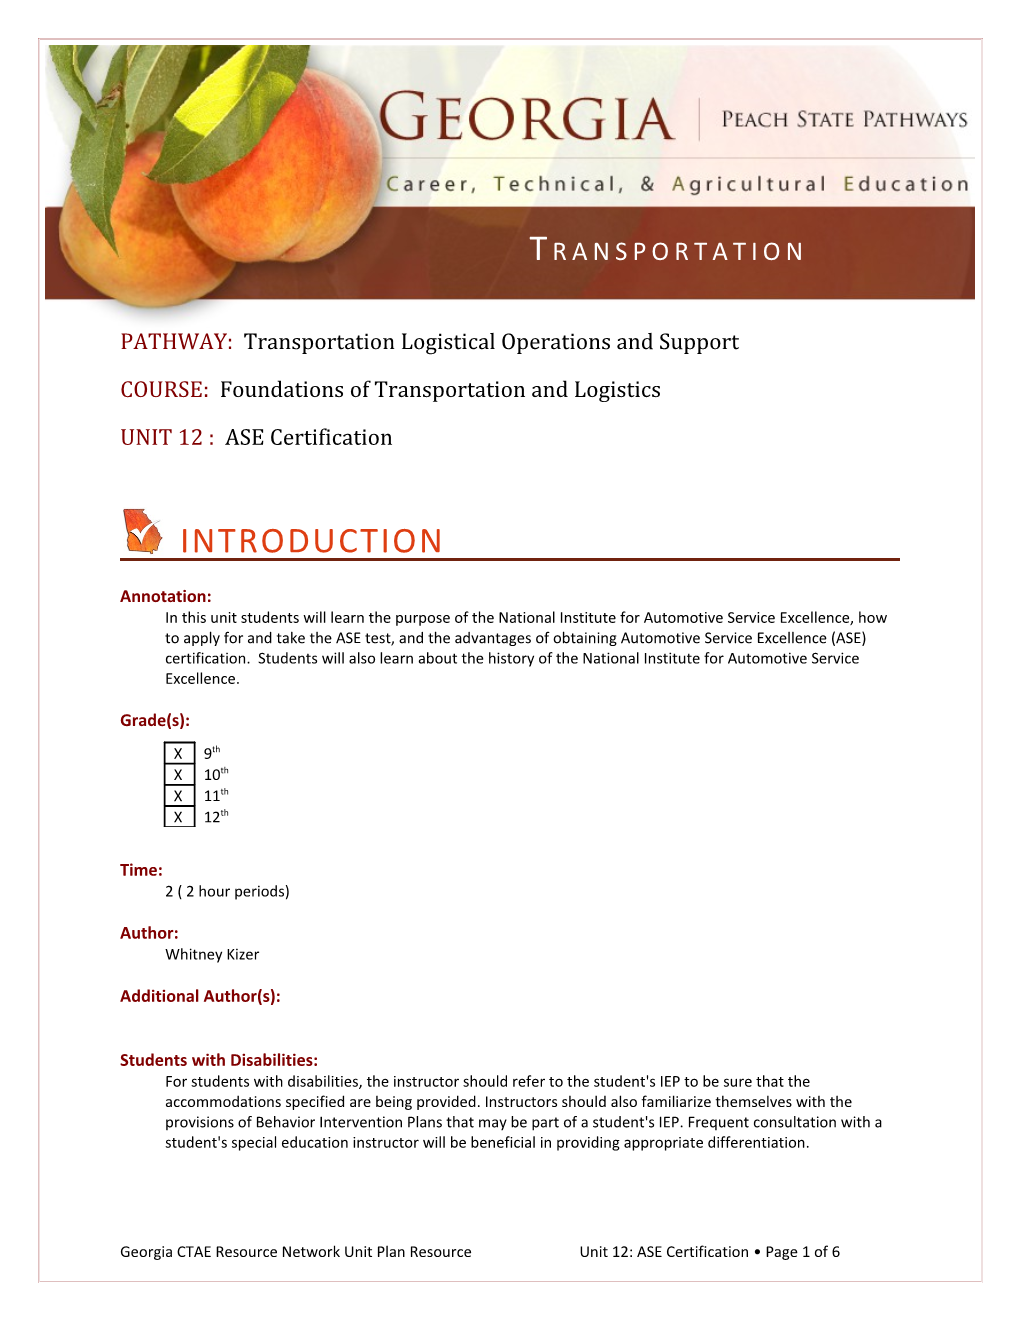 PATHWAY: Transportation Logistical Operations and Support s1